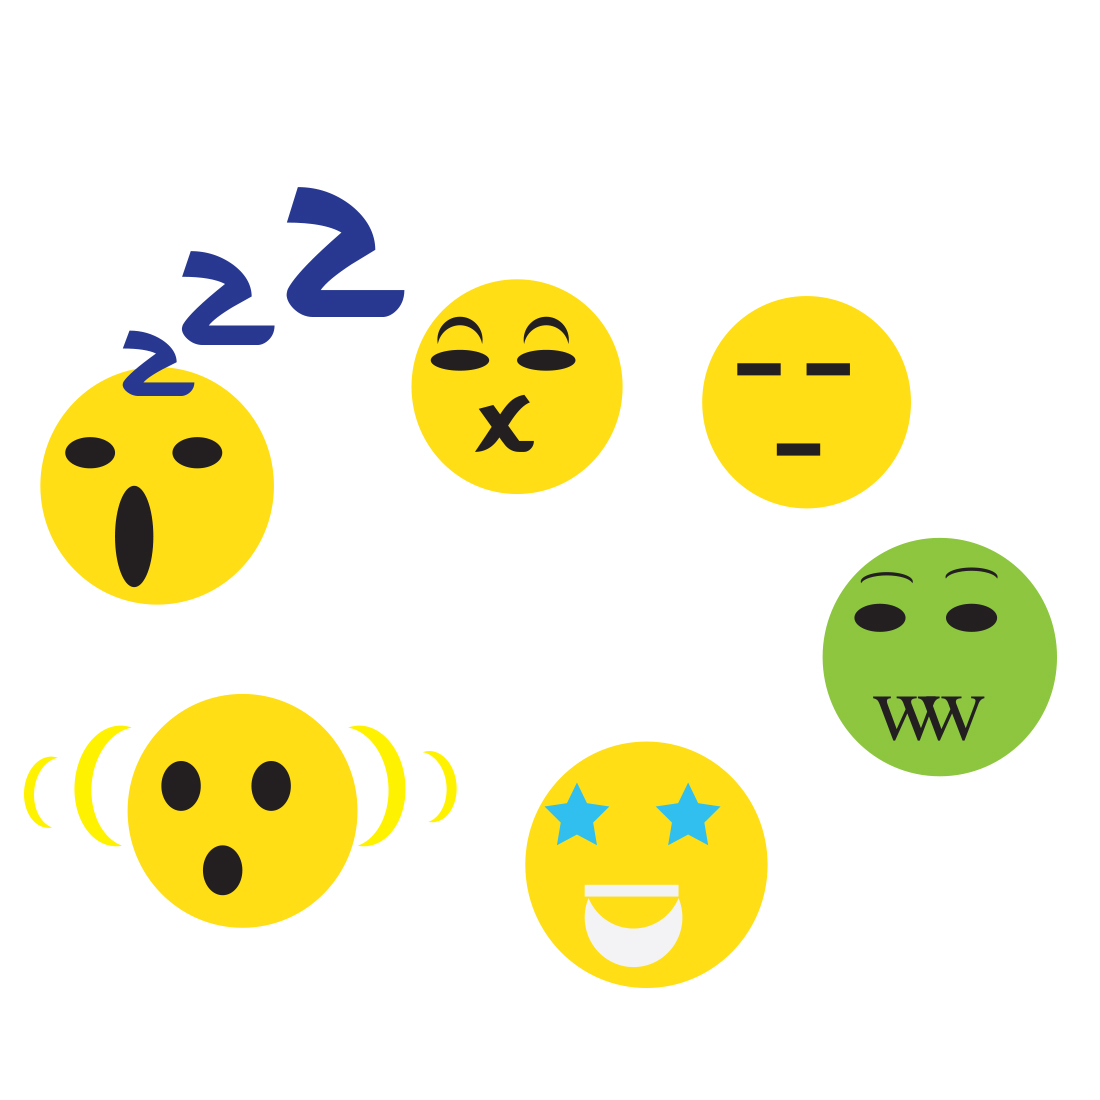 Group of smiley faces with different expressions.